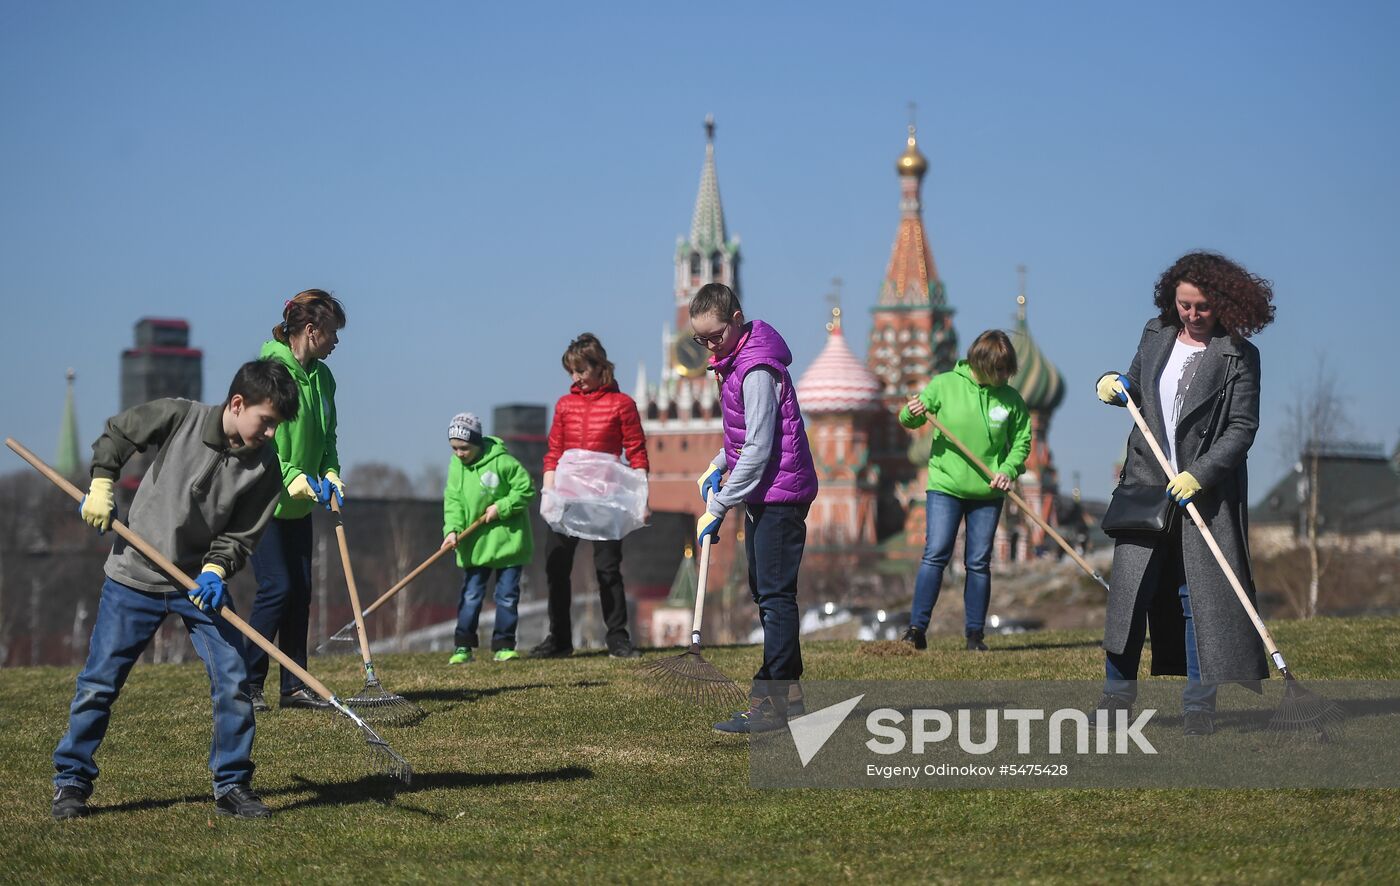 Volunteer clean-up day in Moscow